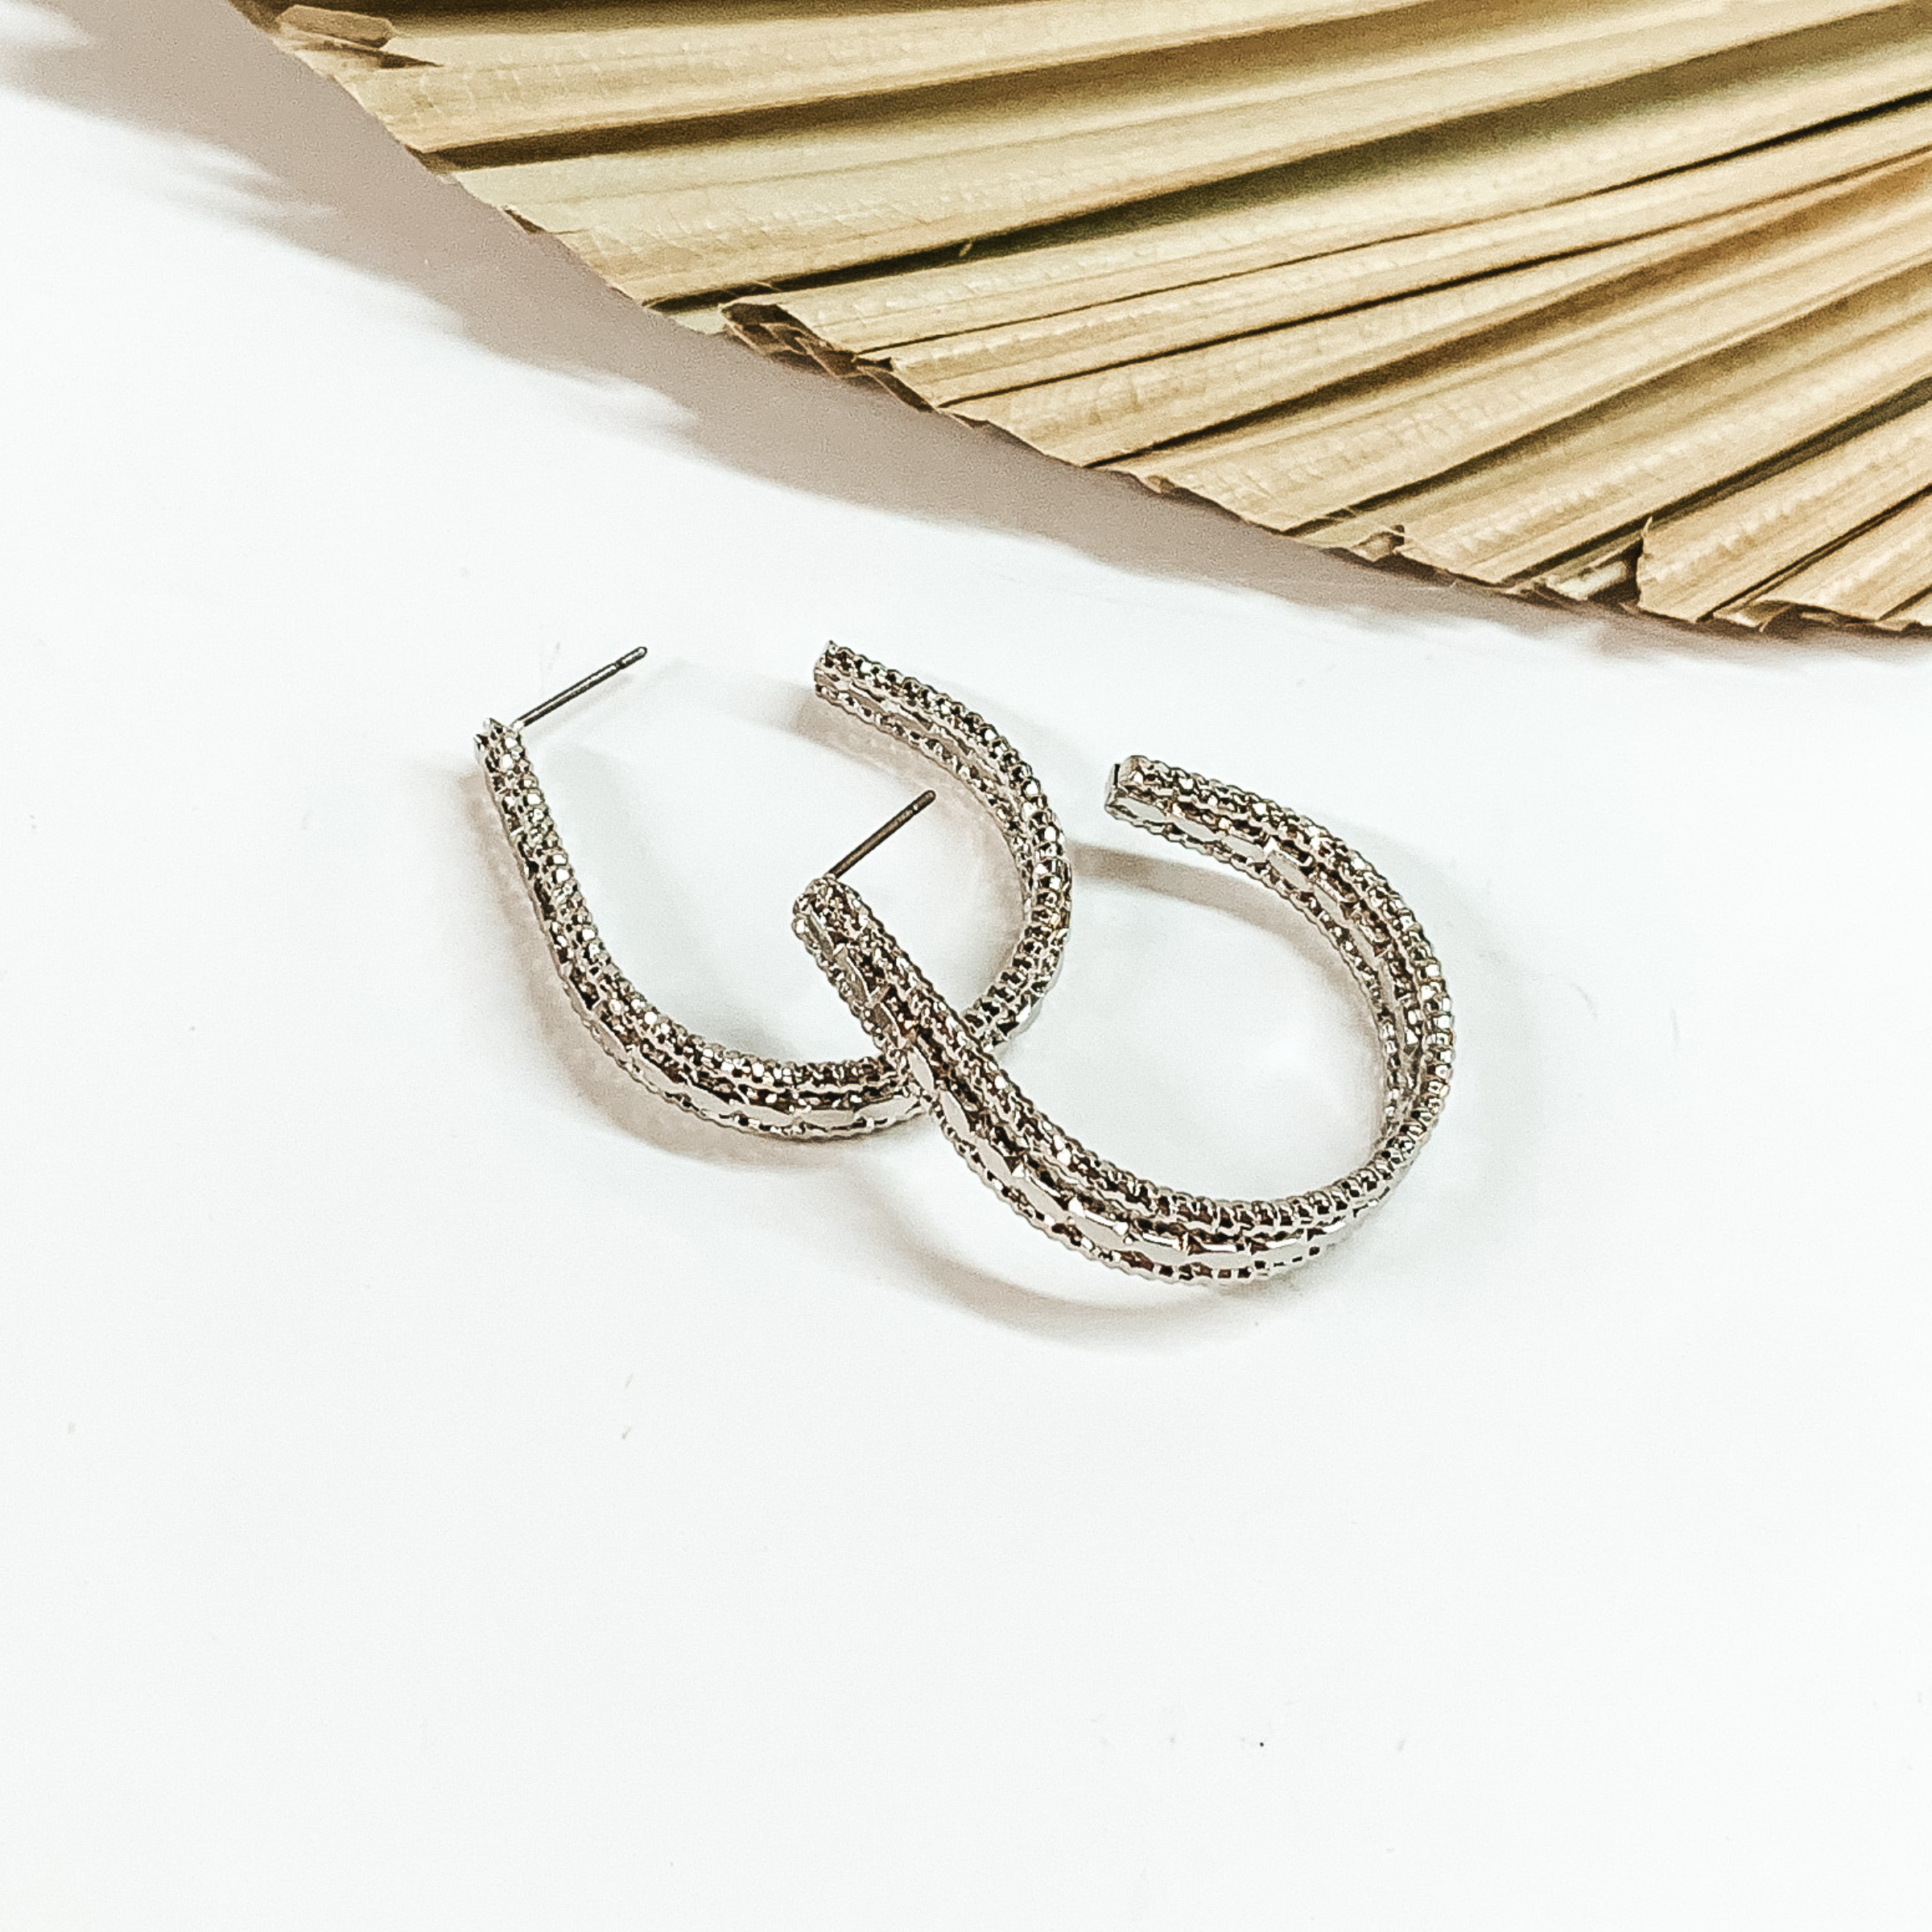 Darling Daze Rope Textured Teardrop Hoop Earrings in Silver Tone - Giddy Up Glamour Boutique